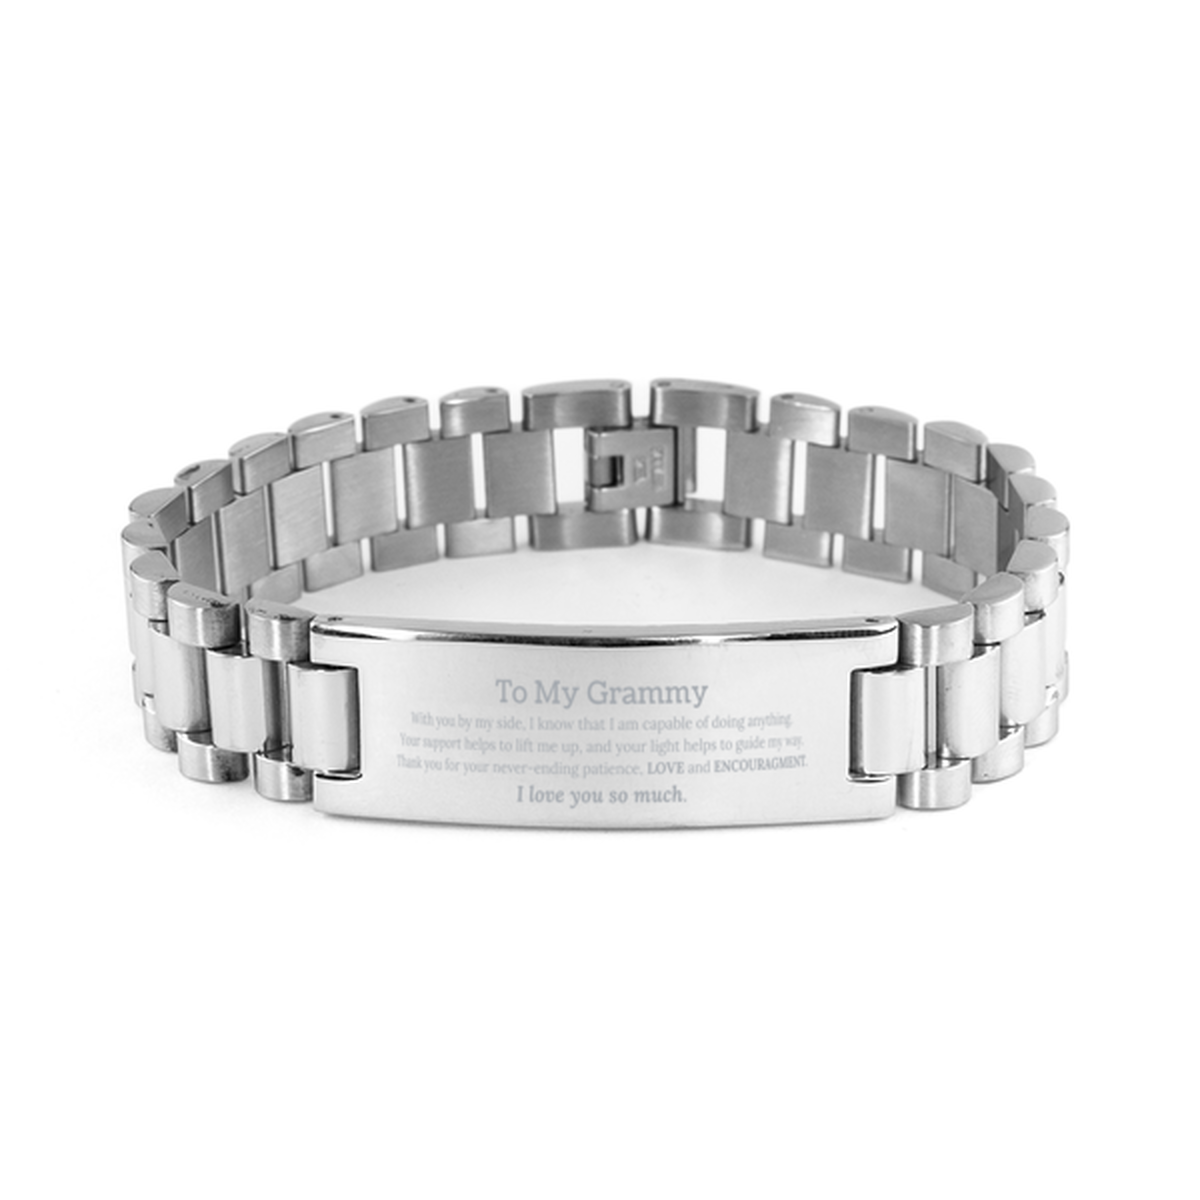 Appreciation Grammy Ladder Stainless Steel Bracelet Gifts, To My Grammy Birthday Christmas Wedding Keepsake Gifts for Grammy With you by my side, I know that I am capable of doing anything. I love you so much